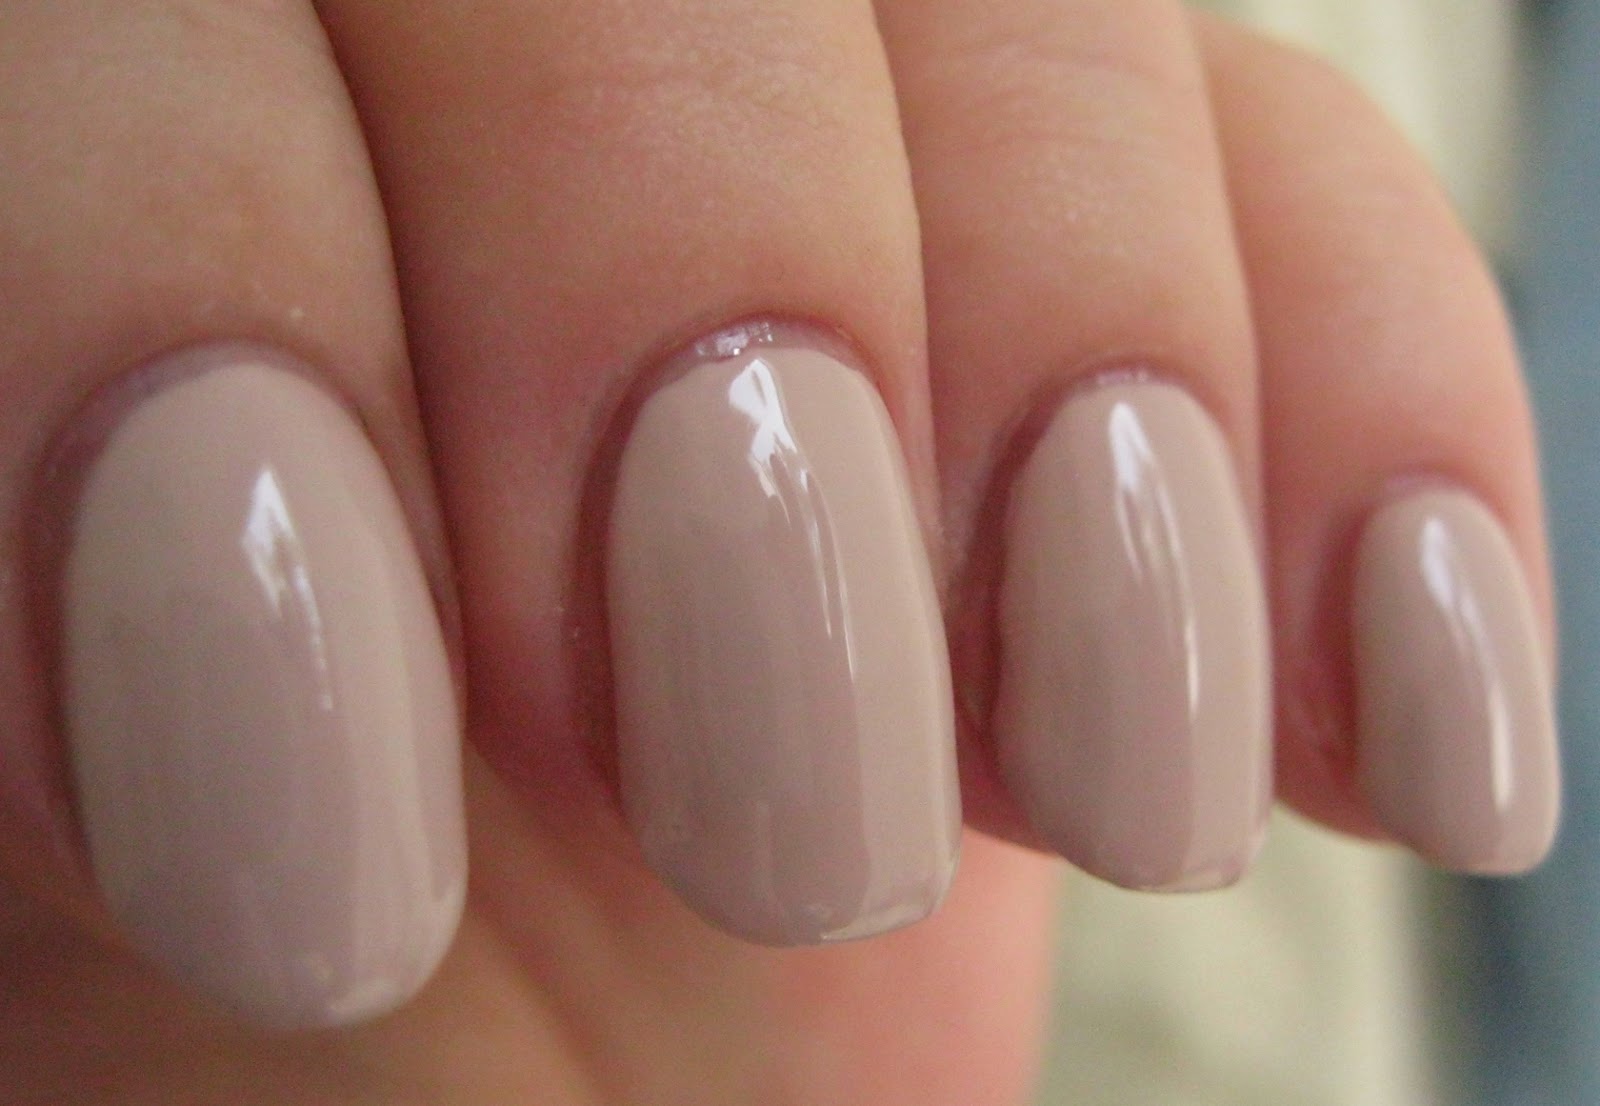 7. OPI GelColor in "Don't Bossa Nova Me Around" - wide 1